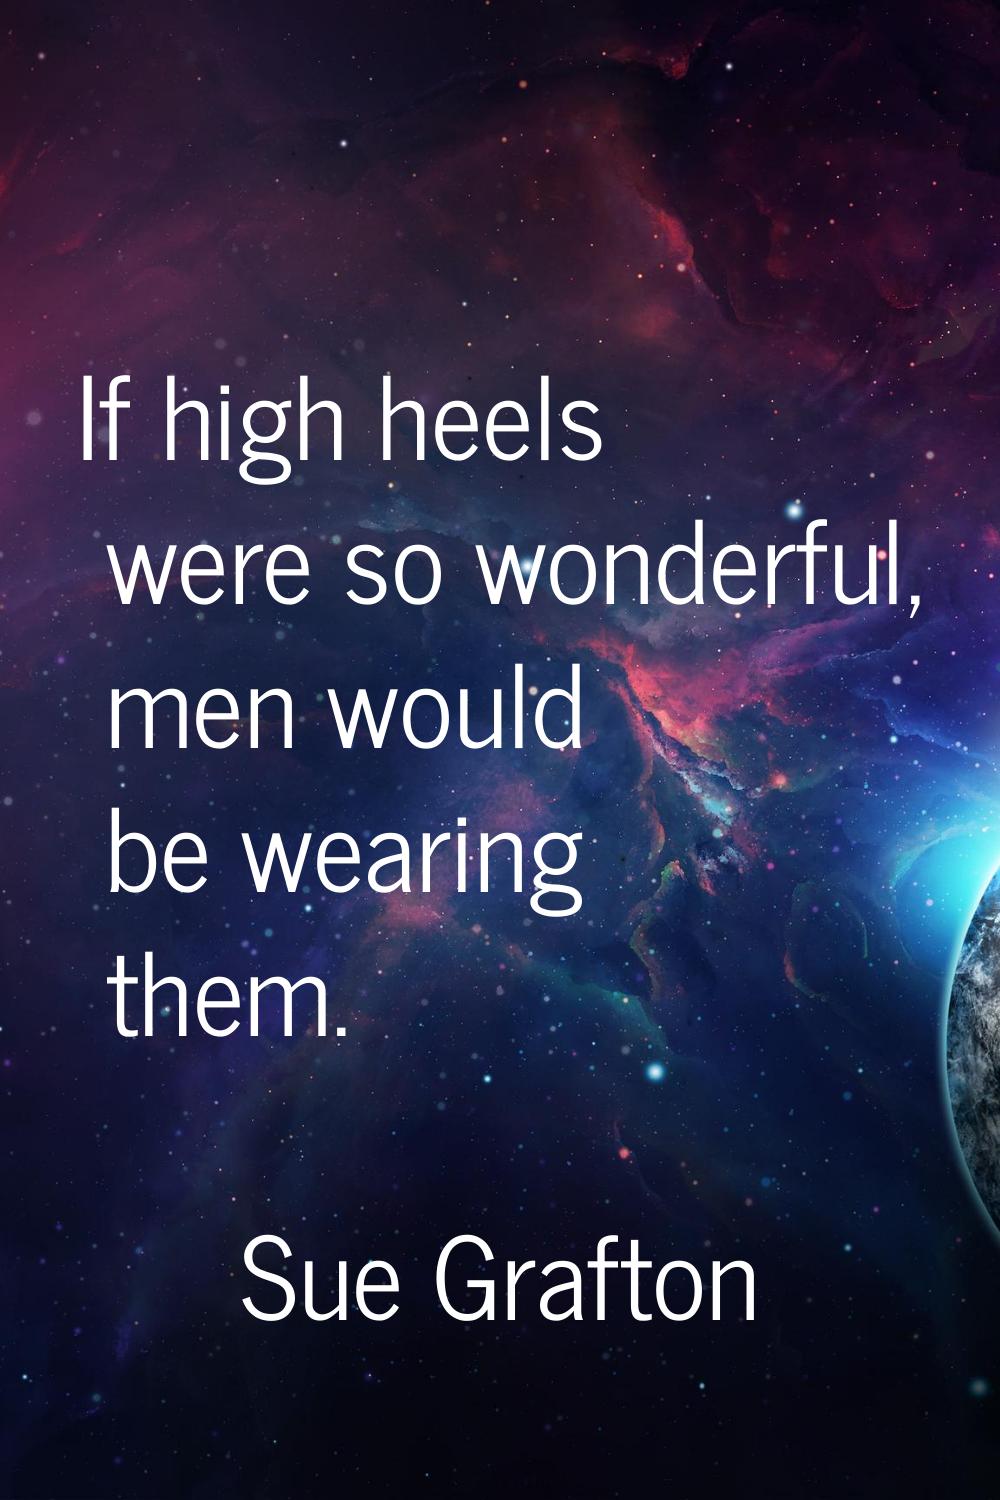 If high heels were so wonderful, men would be wearing them.